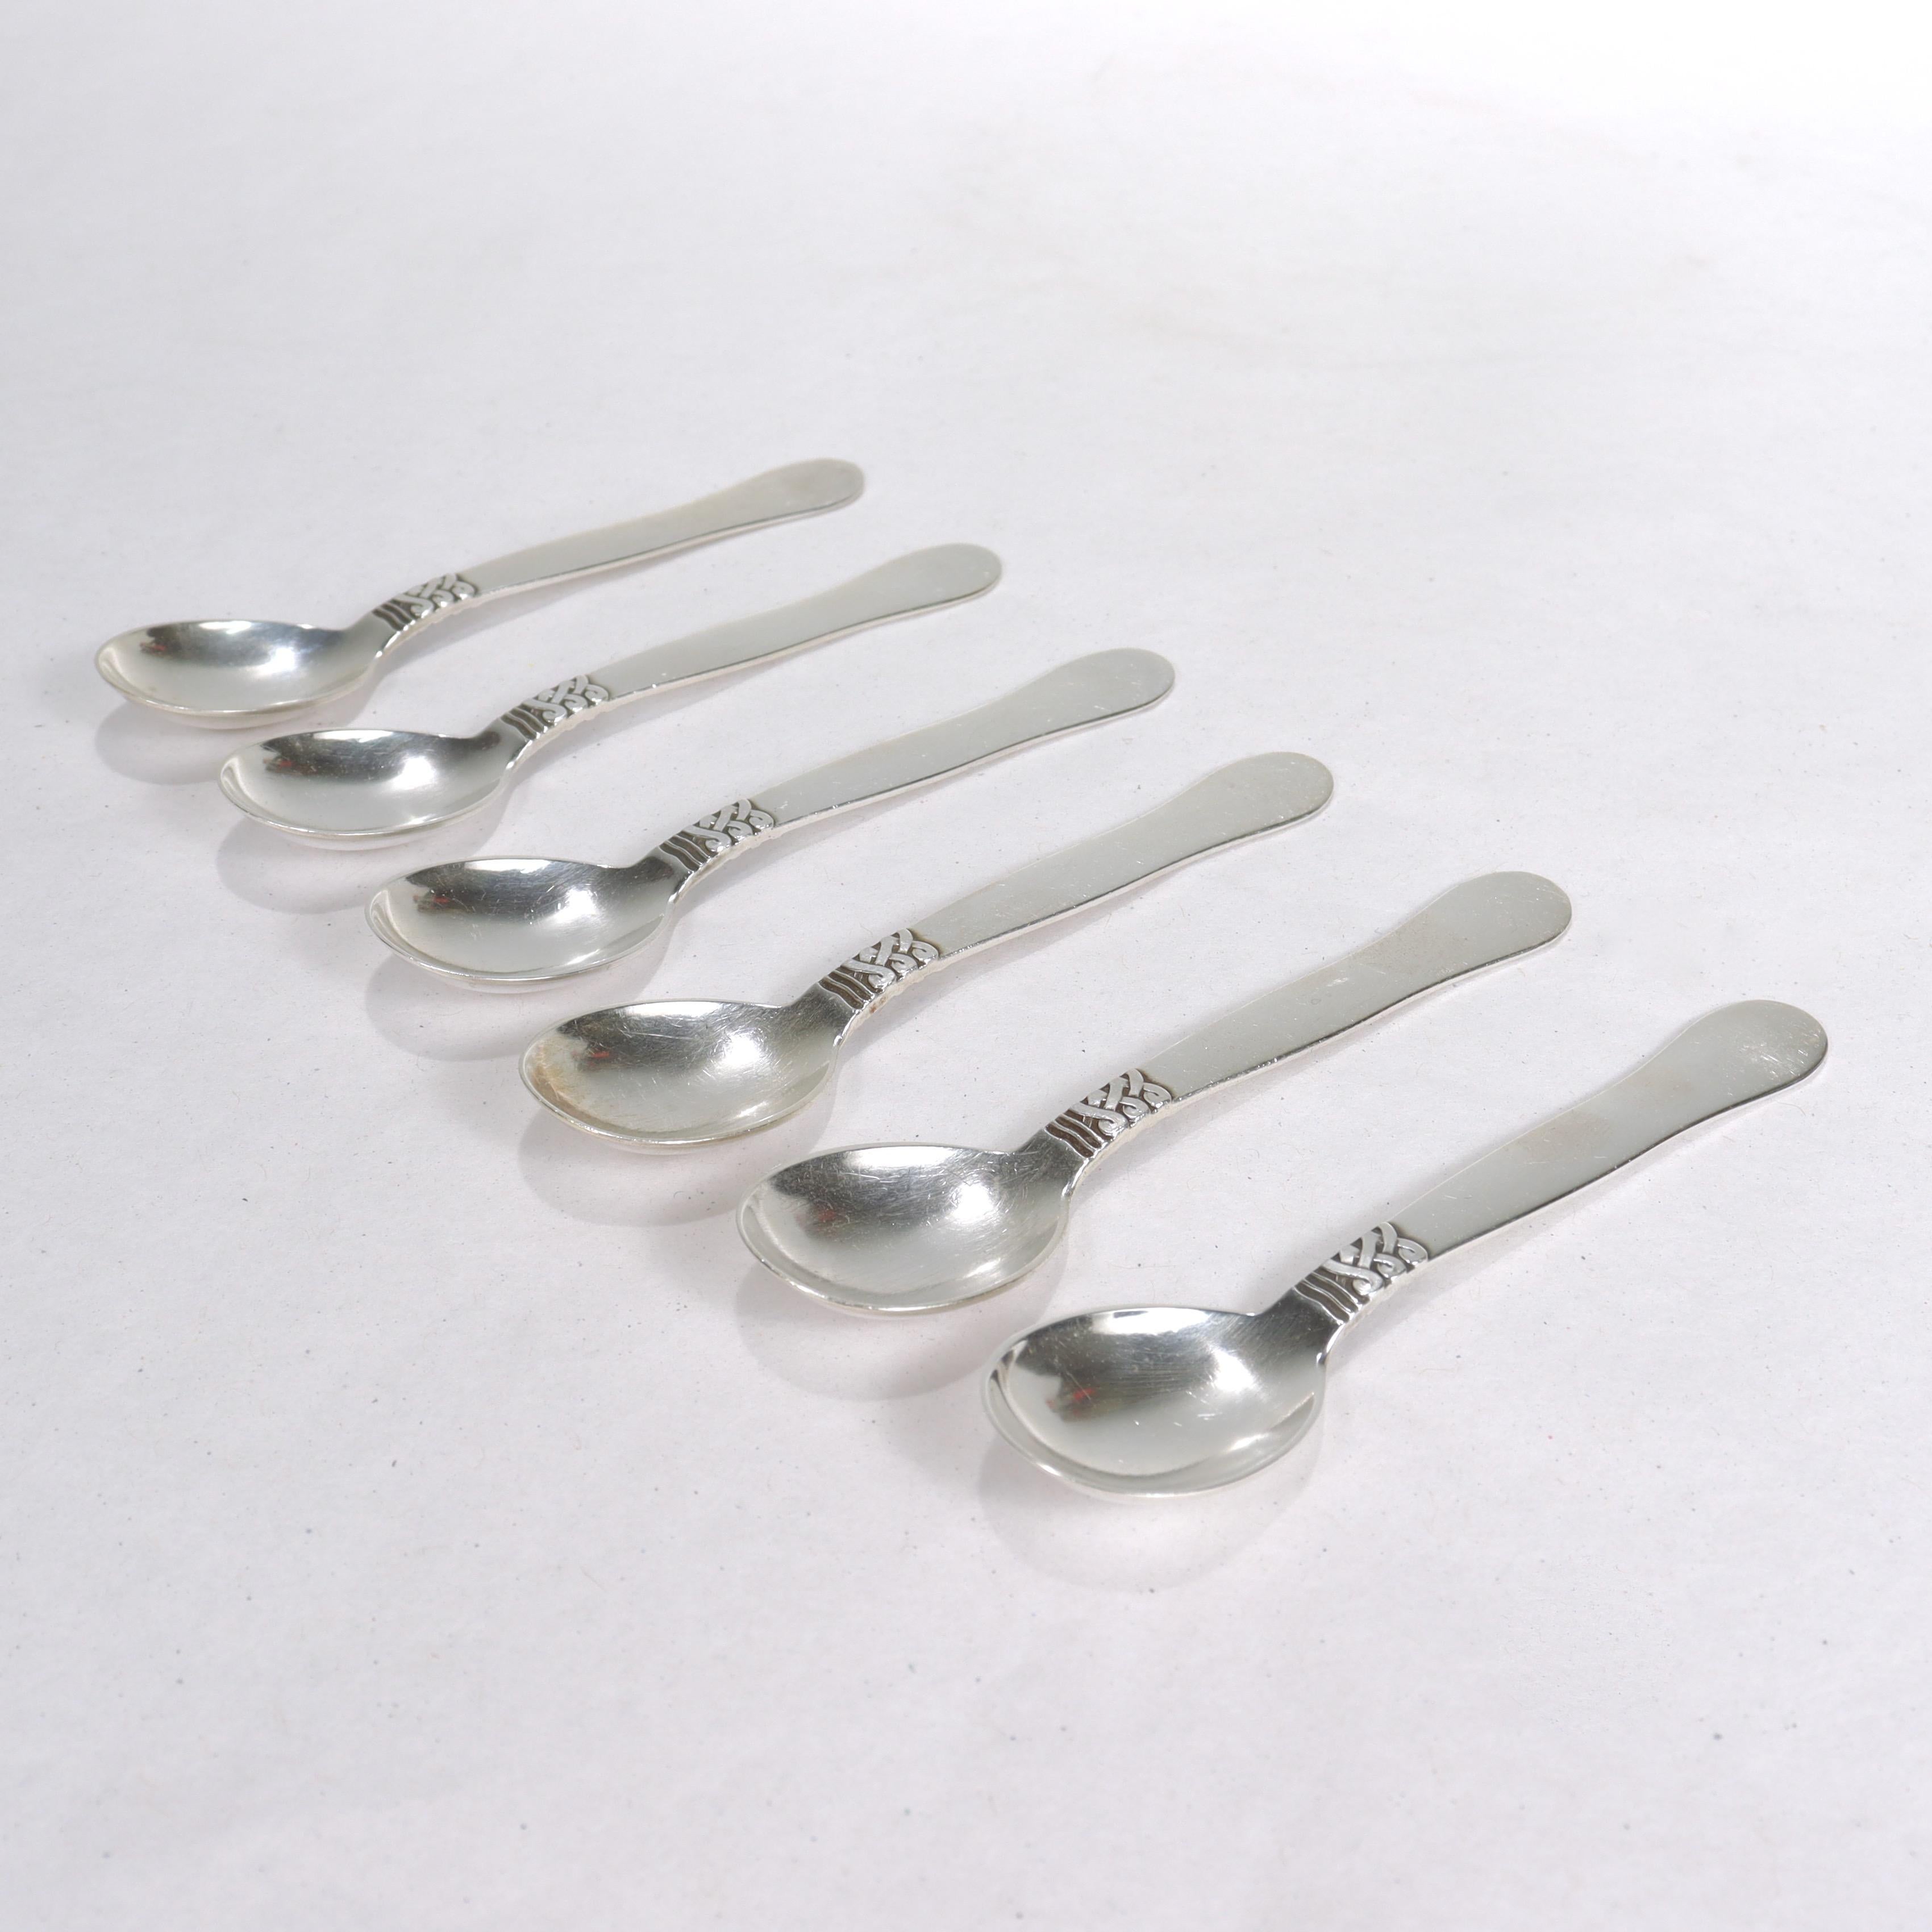 A fine set of 6 sterling silver demitasse or coffee spoons.

By Georg Jensen.

Designed by Oscar Gundlach-Pedersen in 1937.

These spoons have a post-1945 factory mark.

Simply a wonderful set of Georg Jensen spoons!

Date:
20th Century

Overall